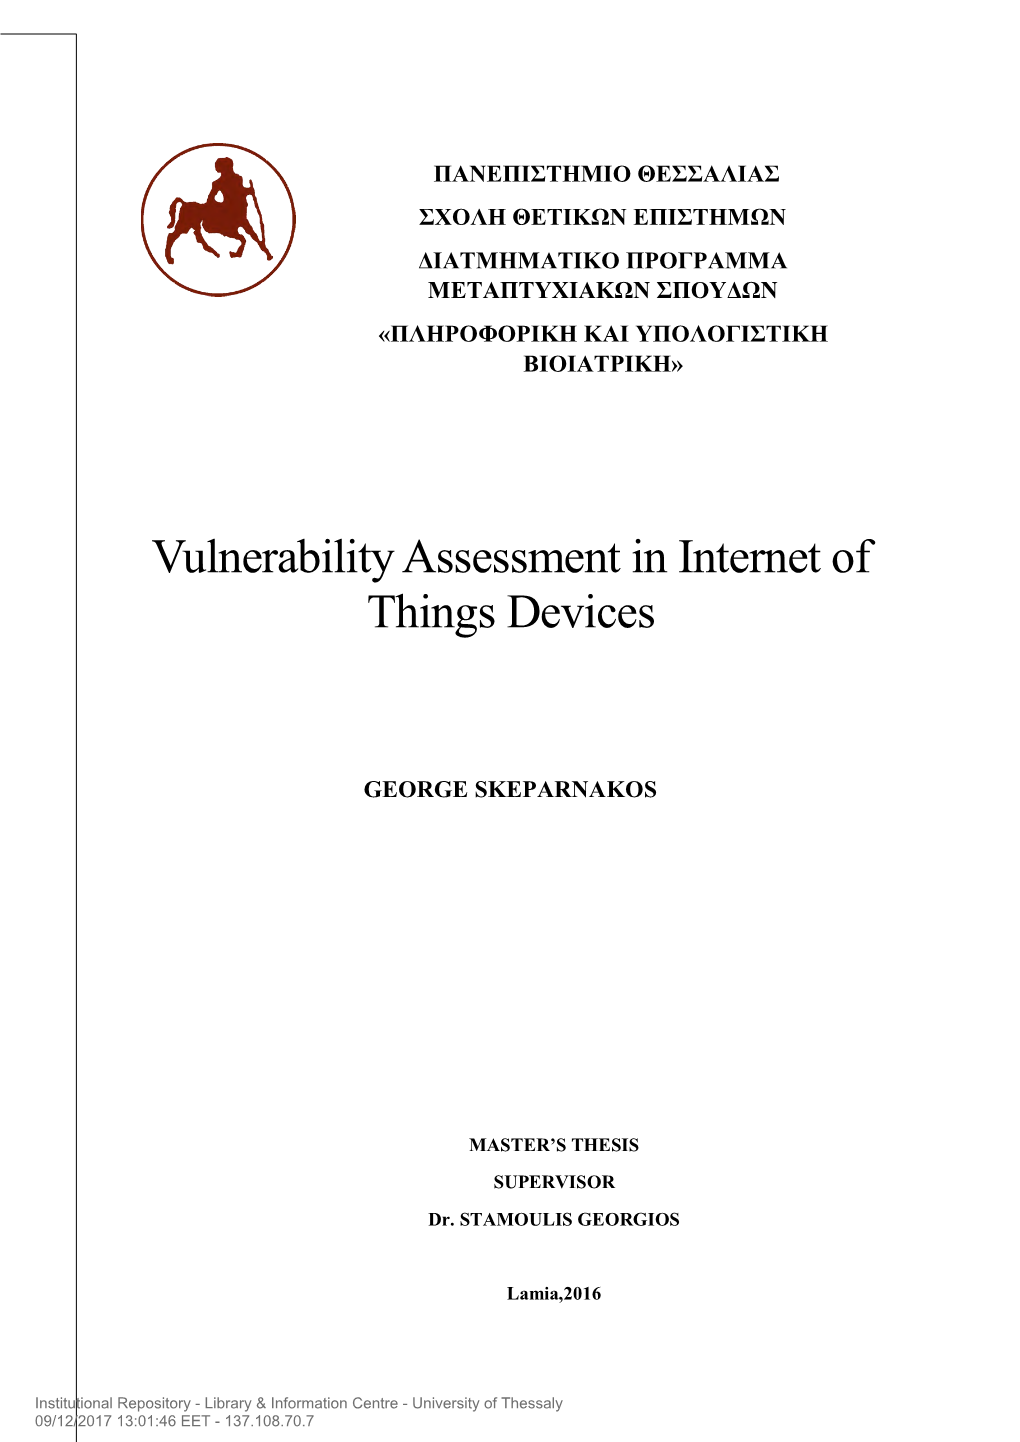 Vulnerability Assessment in Internet of Things Devices